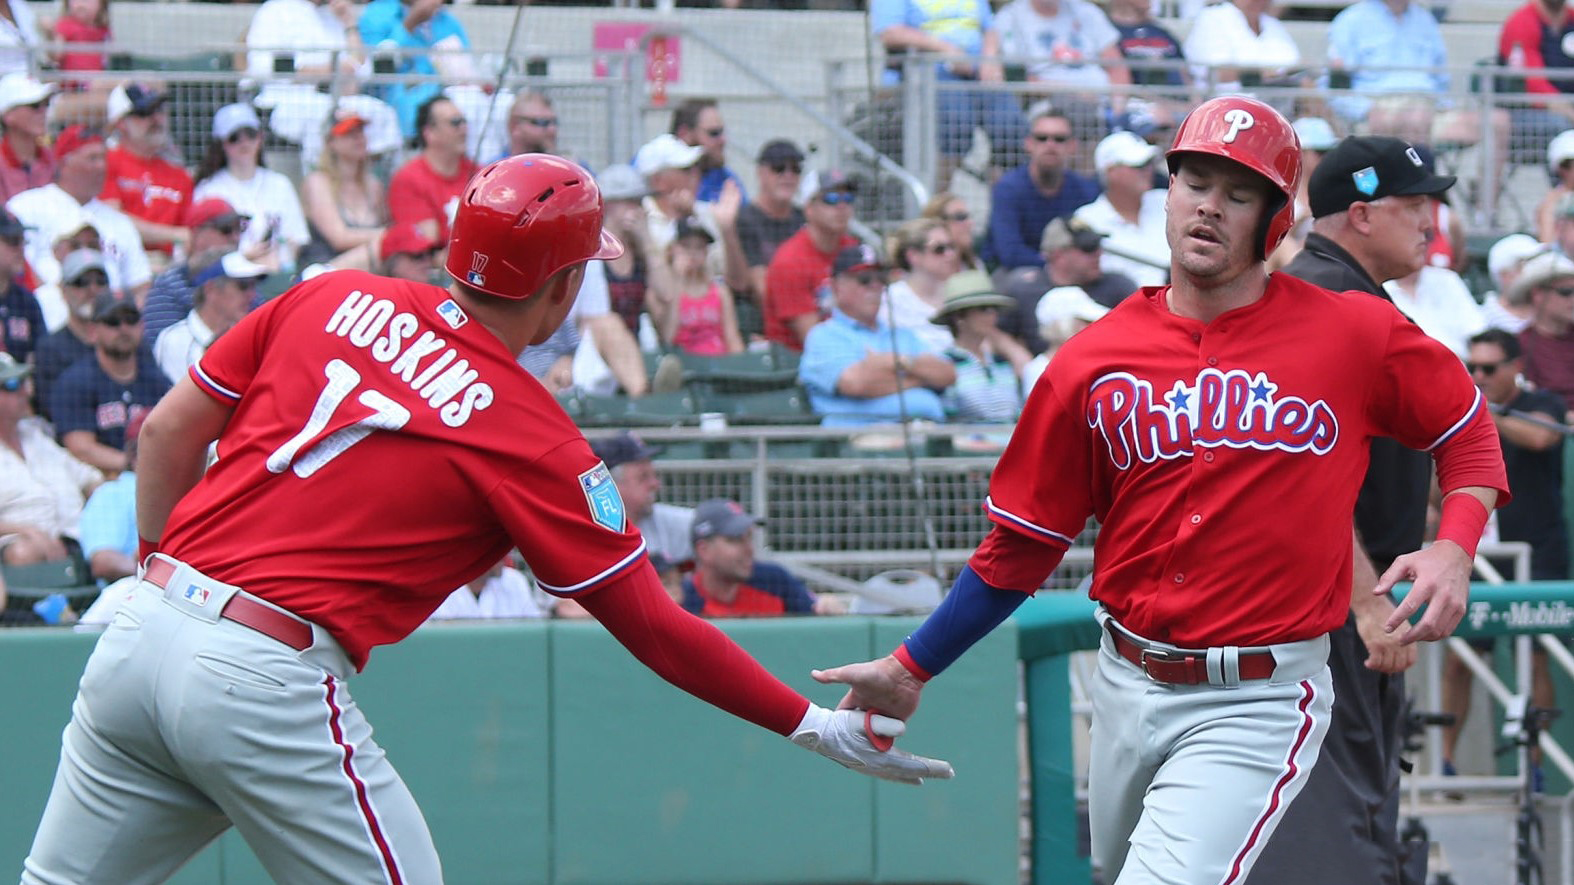 Phillies Announce 2 Key Roster Moves for 28-Man Roster Expansion